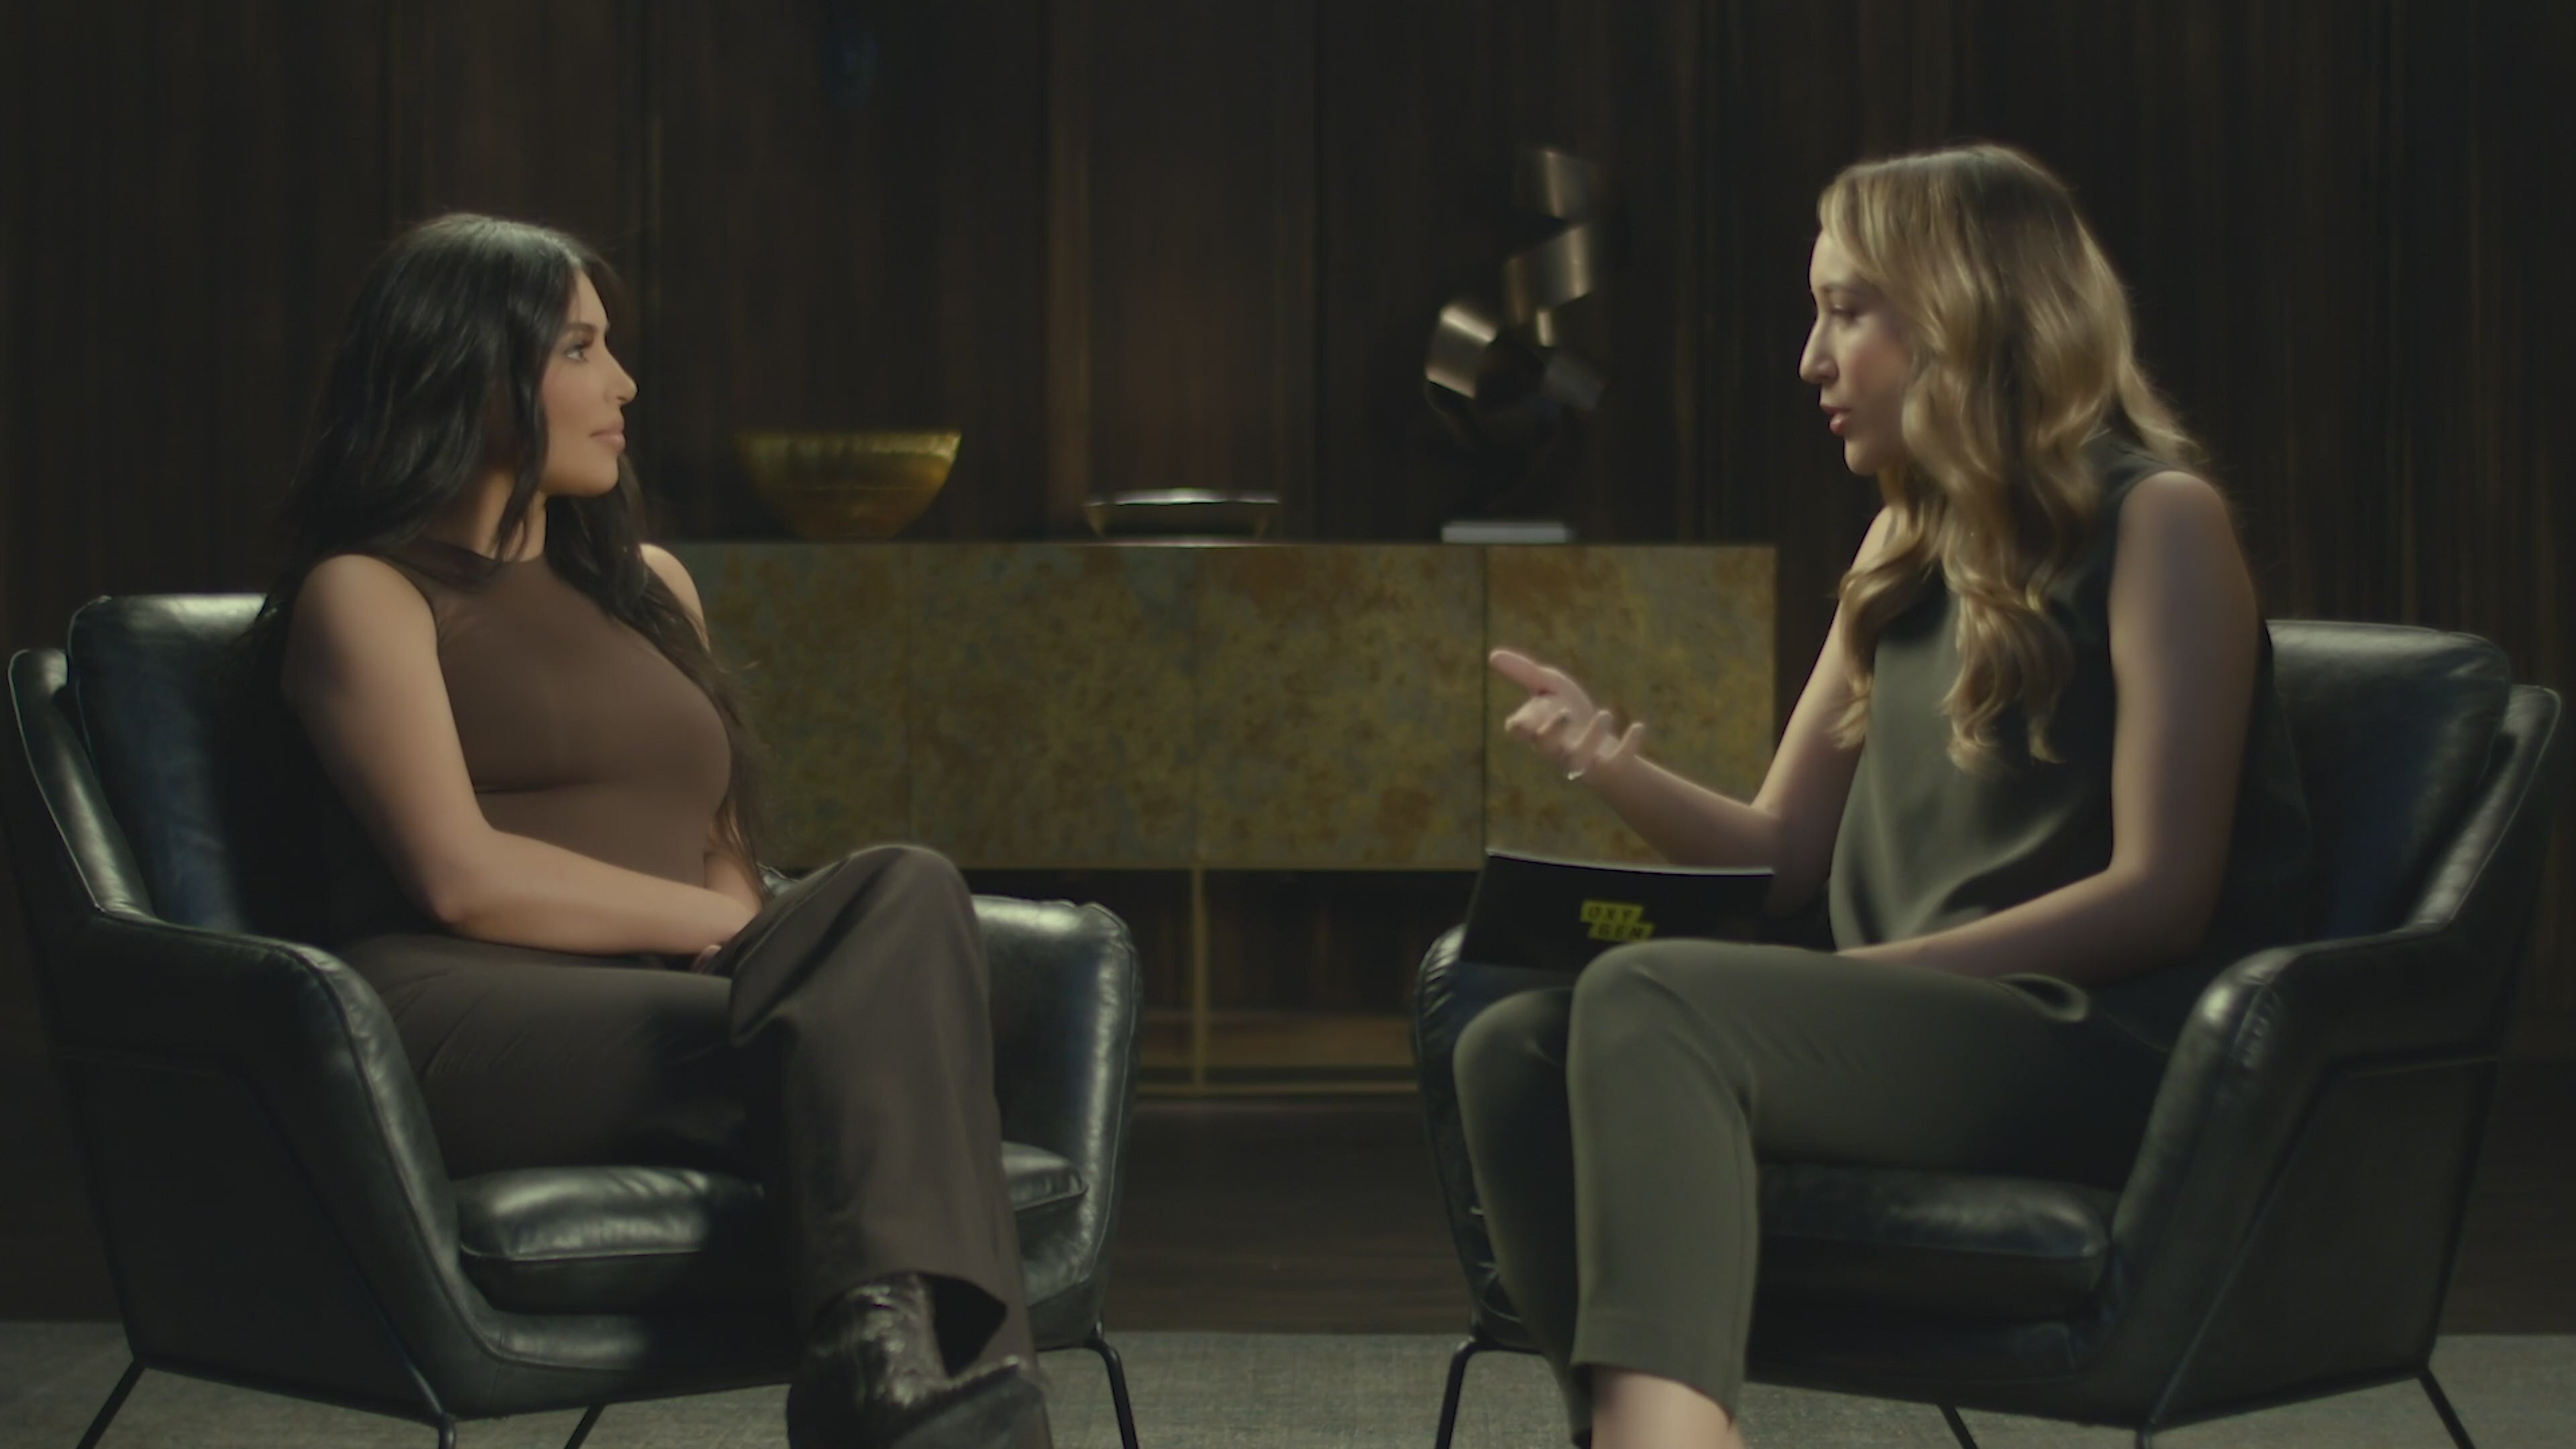 Kim Kardashian West On How The System Can Better Decide If A Person Deserves A Second Chance 